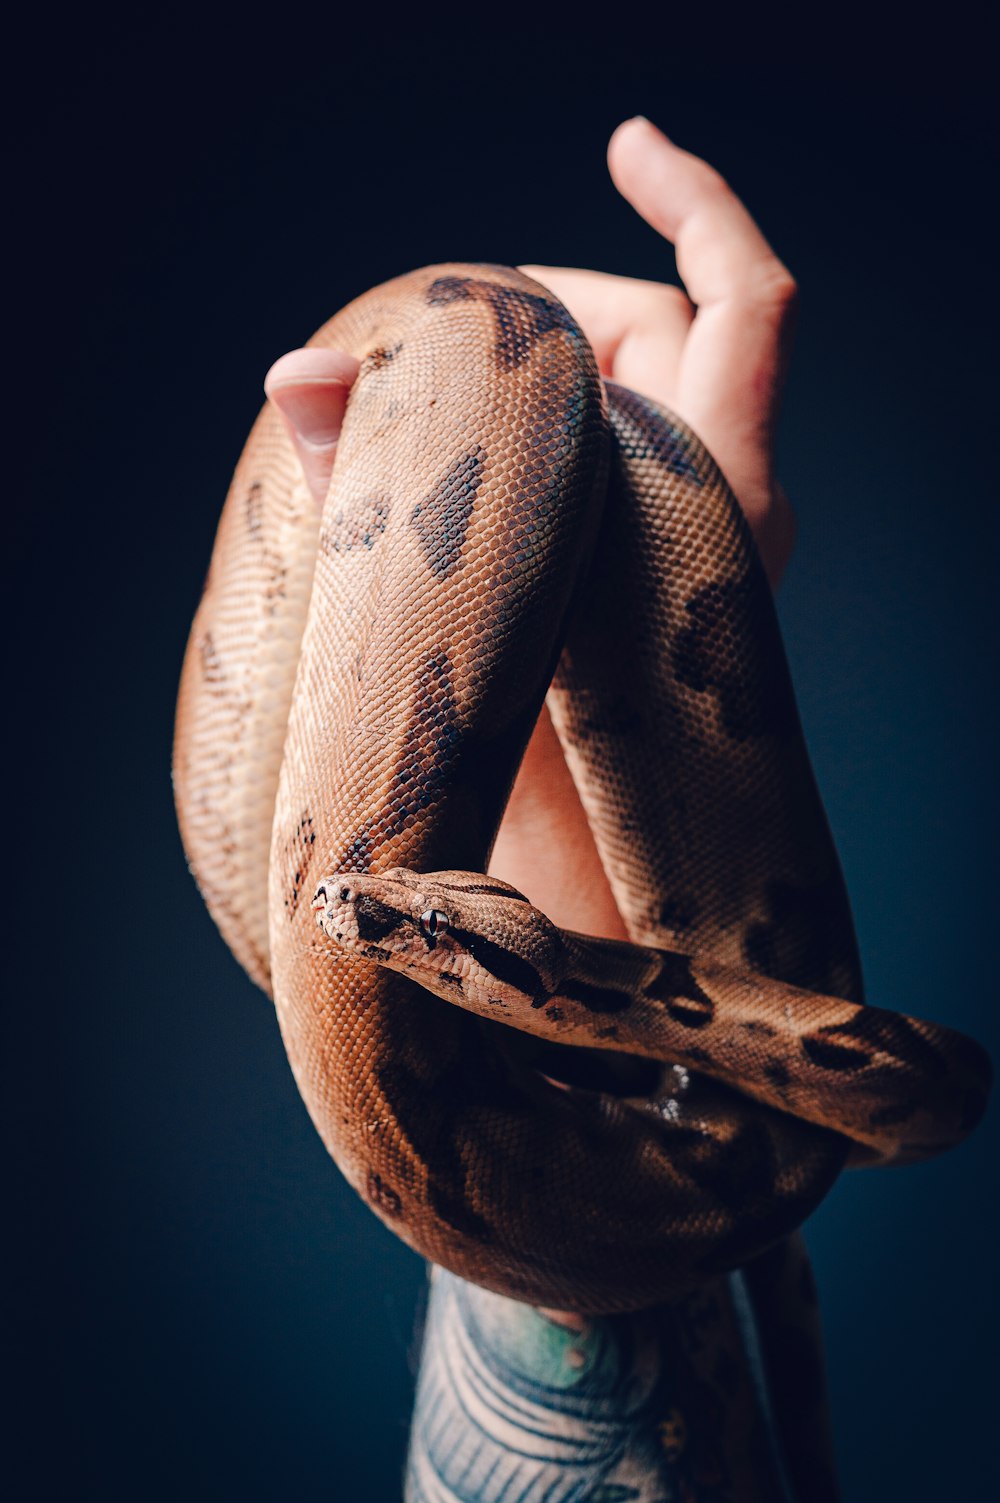 a person holding a large snake in their hand